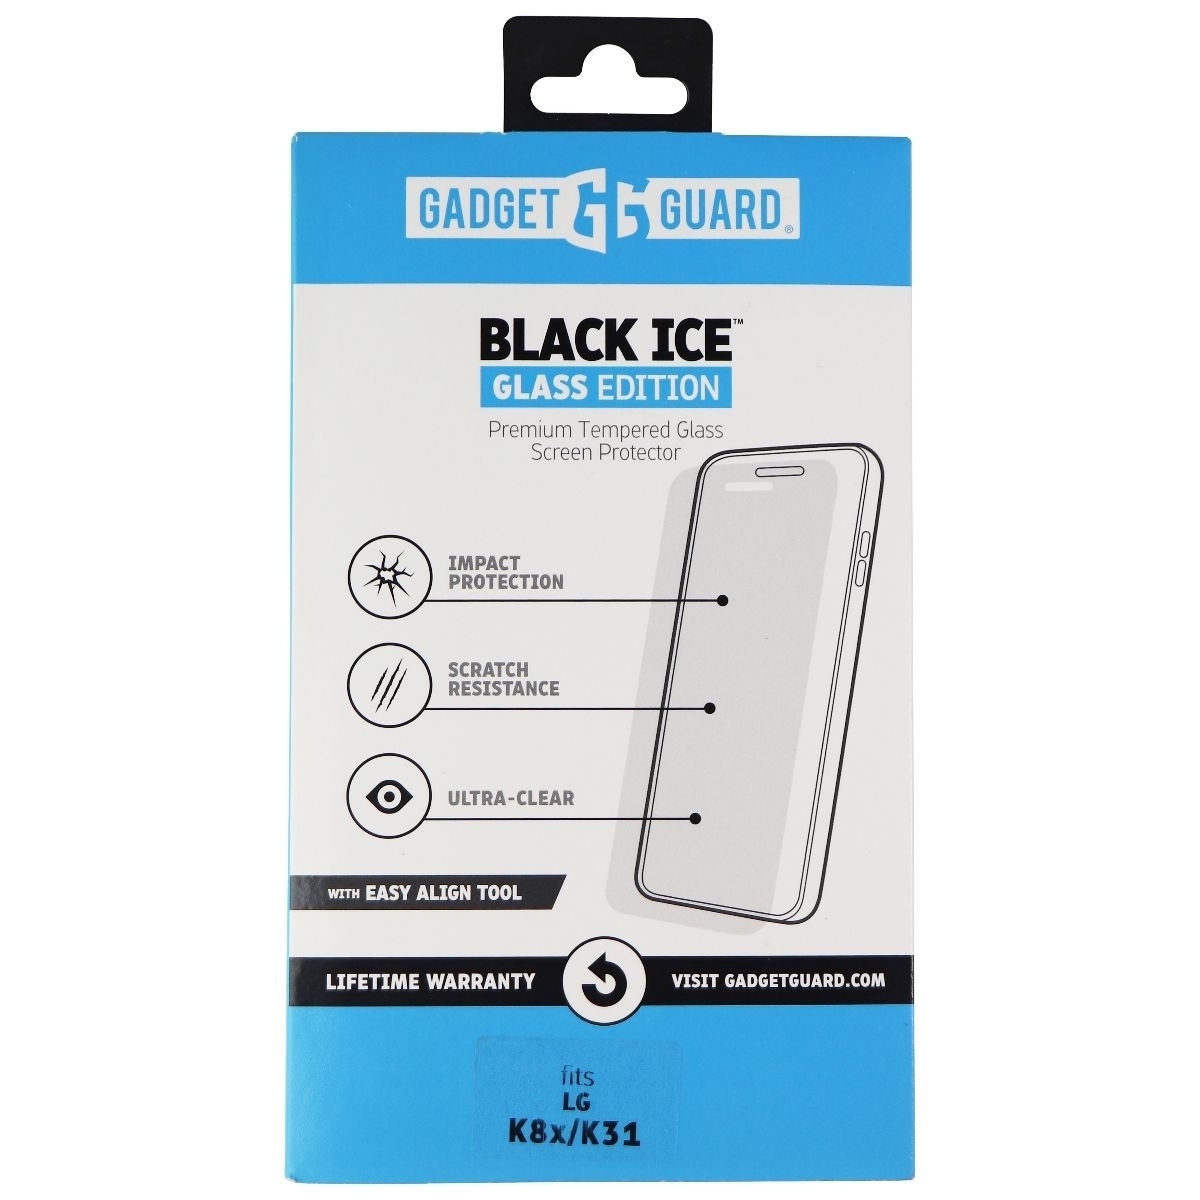 Gadget Guard Black Ice Tempered Glass For LG K8x / K31 Smartphones - Clear